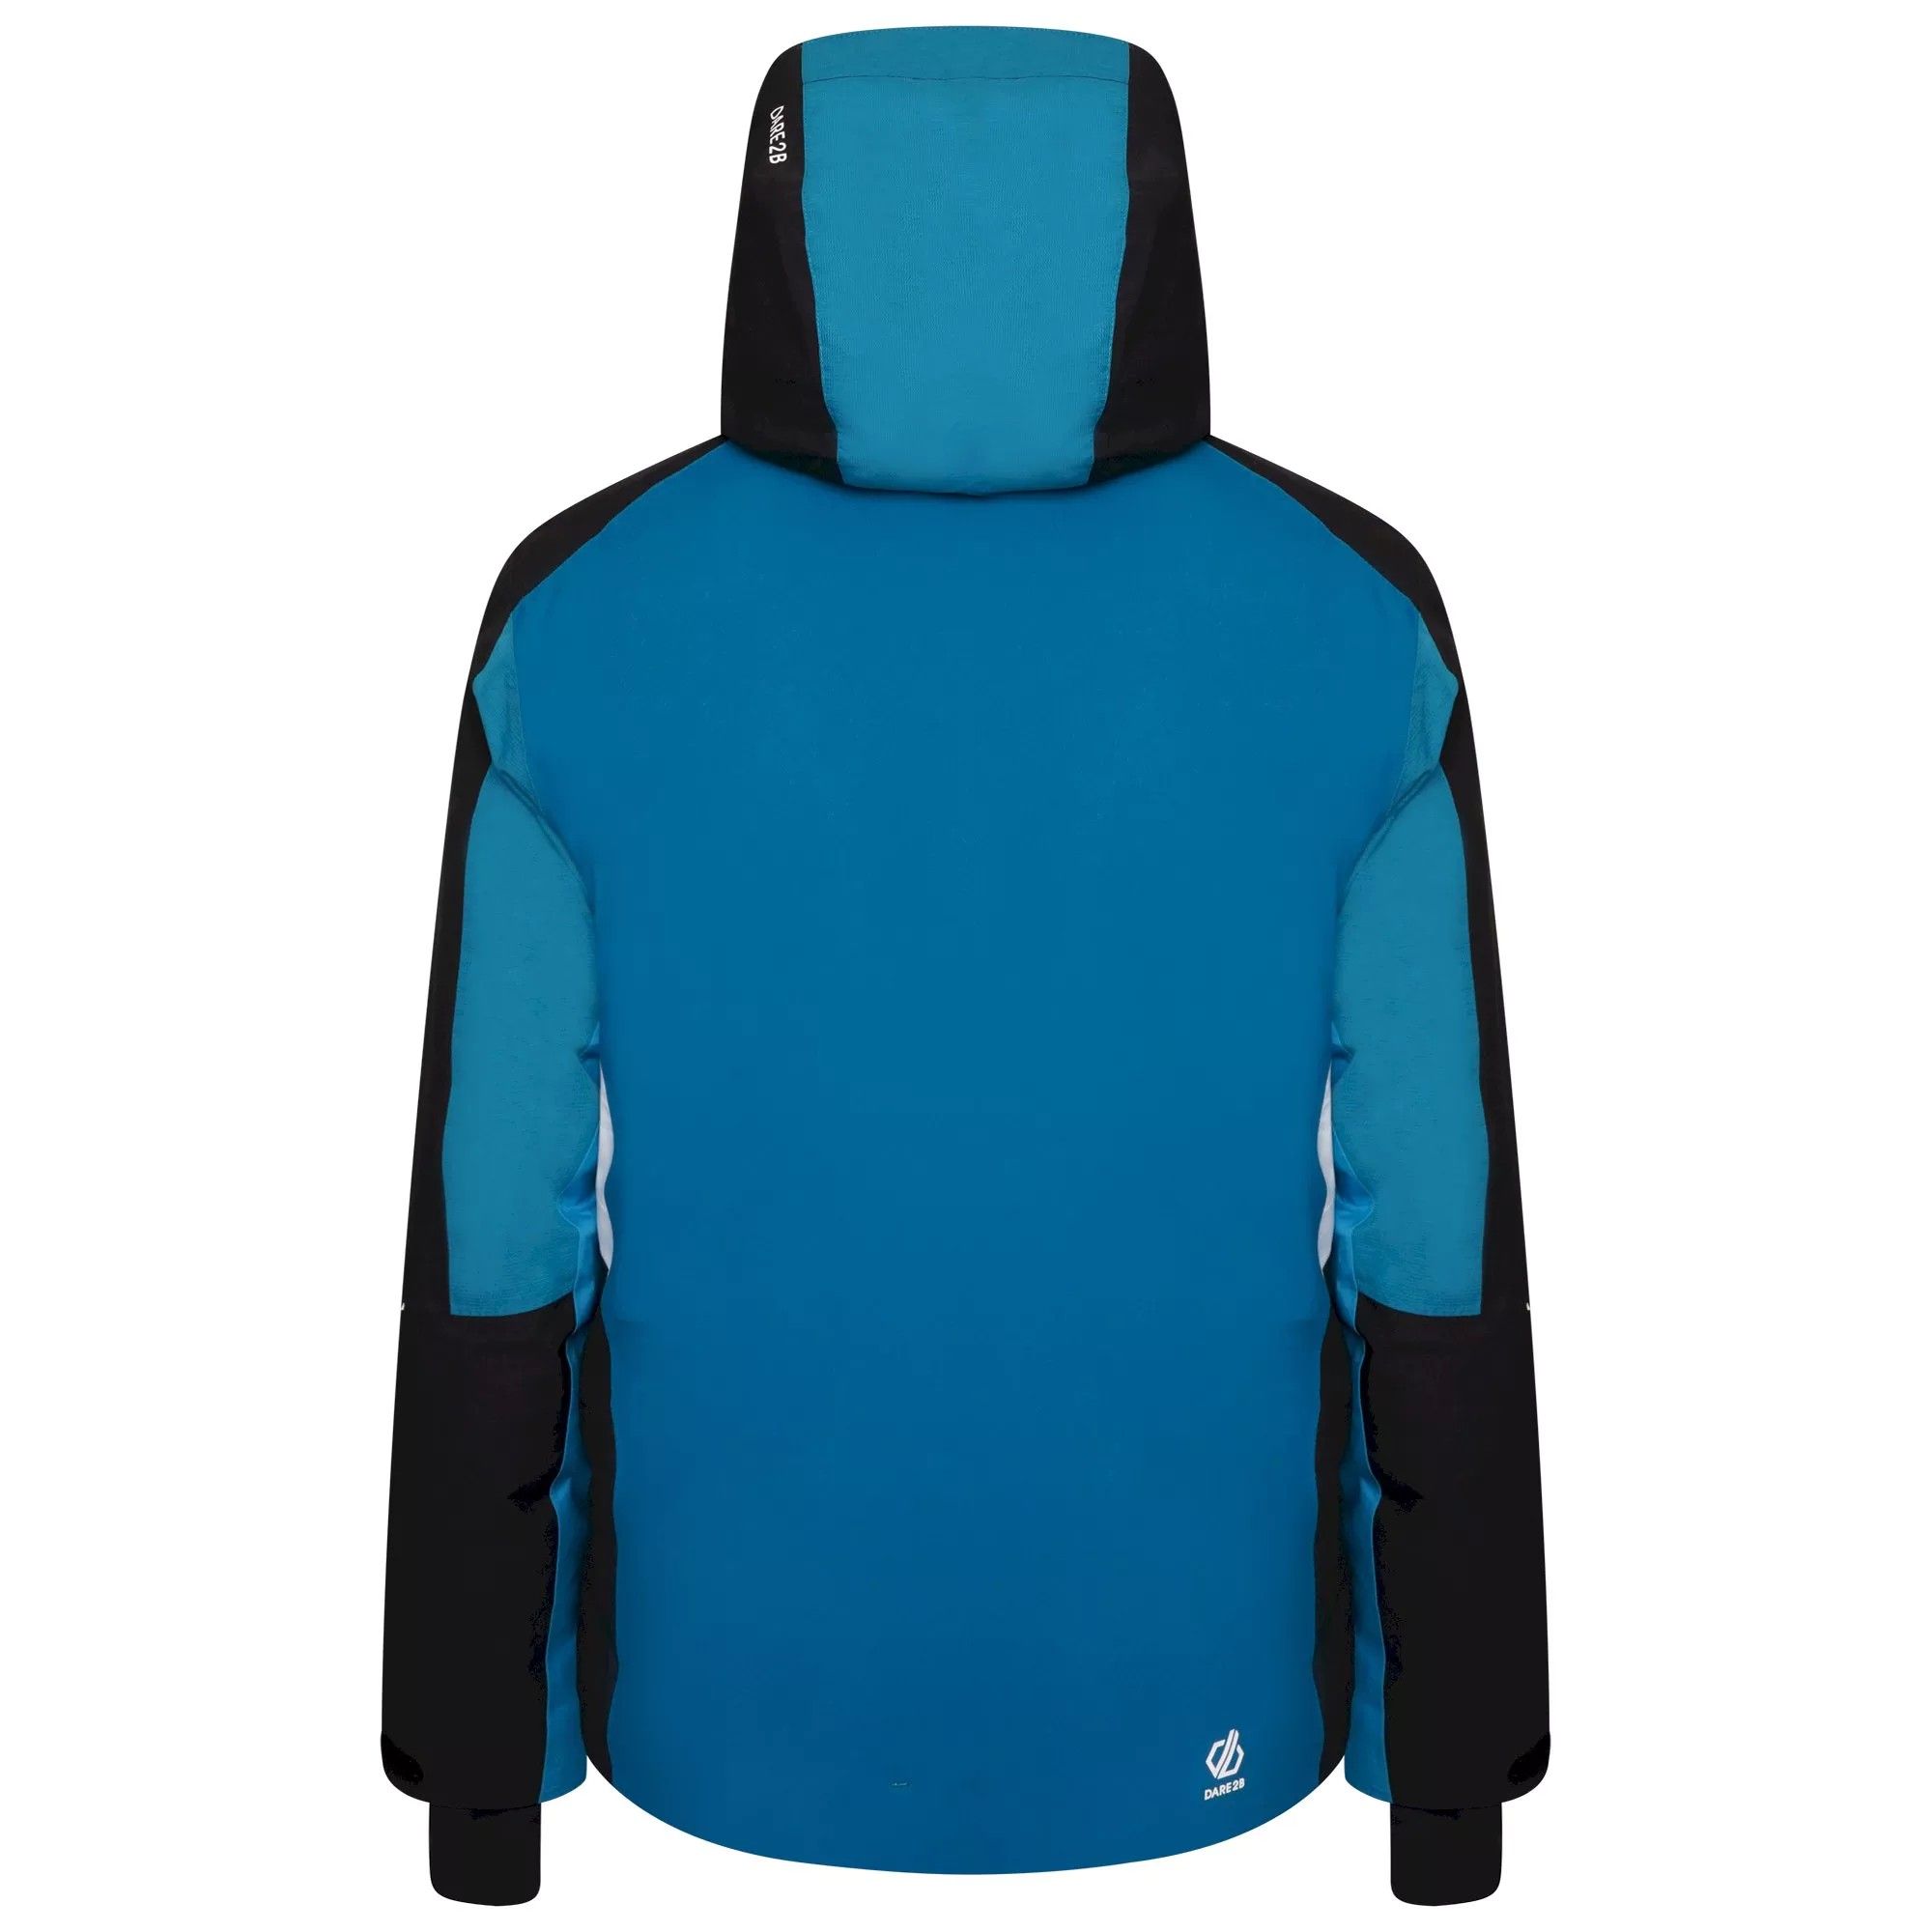 Material: 100% Polyester. Fabric: Stretch. Design: Colour Block, Logo. Fabric Technology: AEP Kinematics, ARED 20/30, Breathable, Waterproof. Chin Guard, Detachable Snowskirt, Gel Grip, Goggle Stash With Lens Wipe, High Warmth, Inner Zip Guard, Taped Seams, Underarm Zips. Cuff: Adjustable, Inner Stretch, Thumb Hole. Sleeve-Type: Articulated, Long-Sleeved. Neckline: Fleece Lined, High-Neck, Hooded. Hood Features: Adjustable, Technical, Wired Peak. Pockets: Ski Pass Pocket, 2 Lower Pockets, 1 Inner Pocket, Zip. Fastening: Water Repellent Zip. Hem: Adjustable. Sustainability: Made from Recycled Materials.